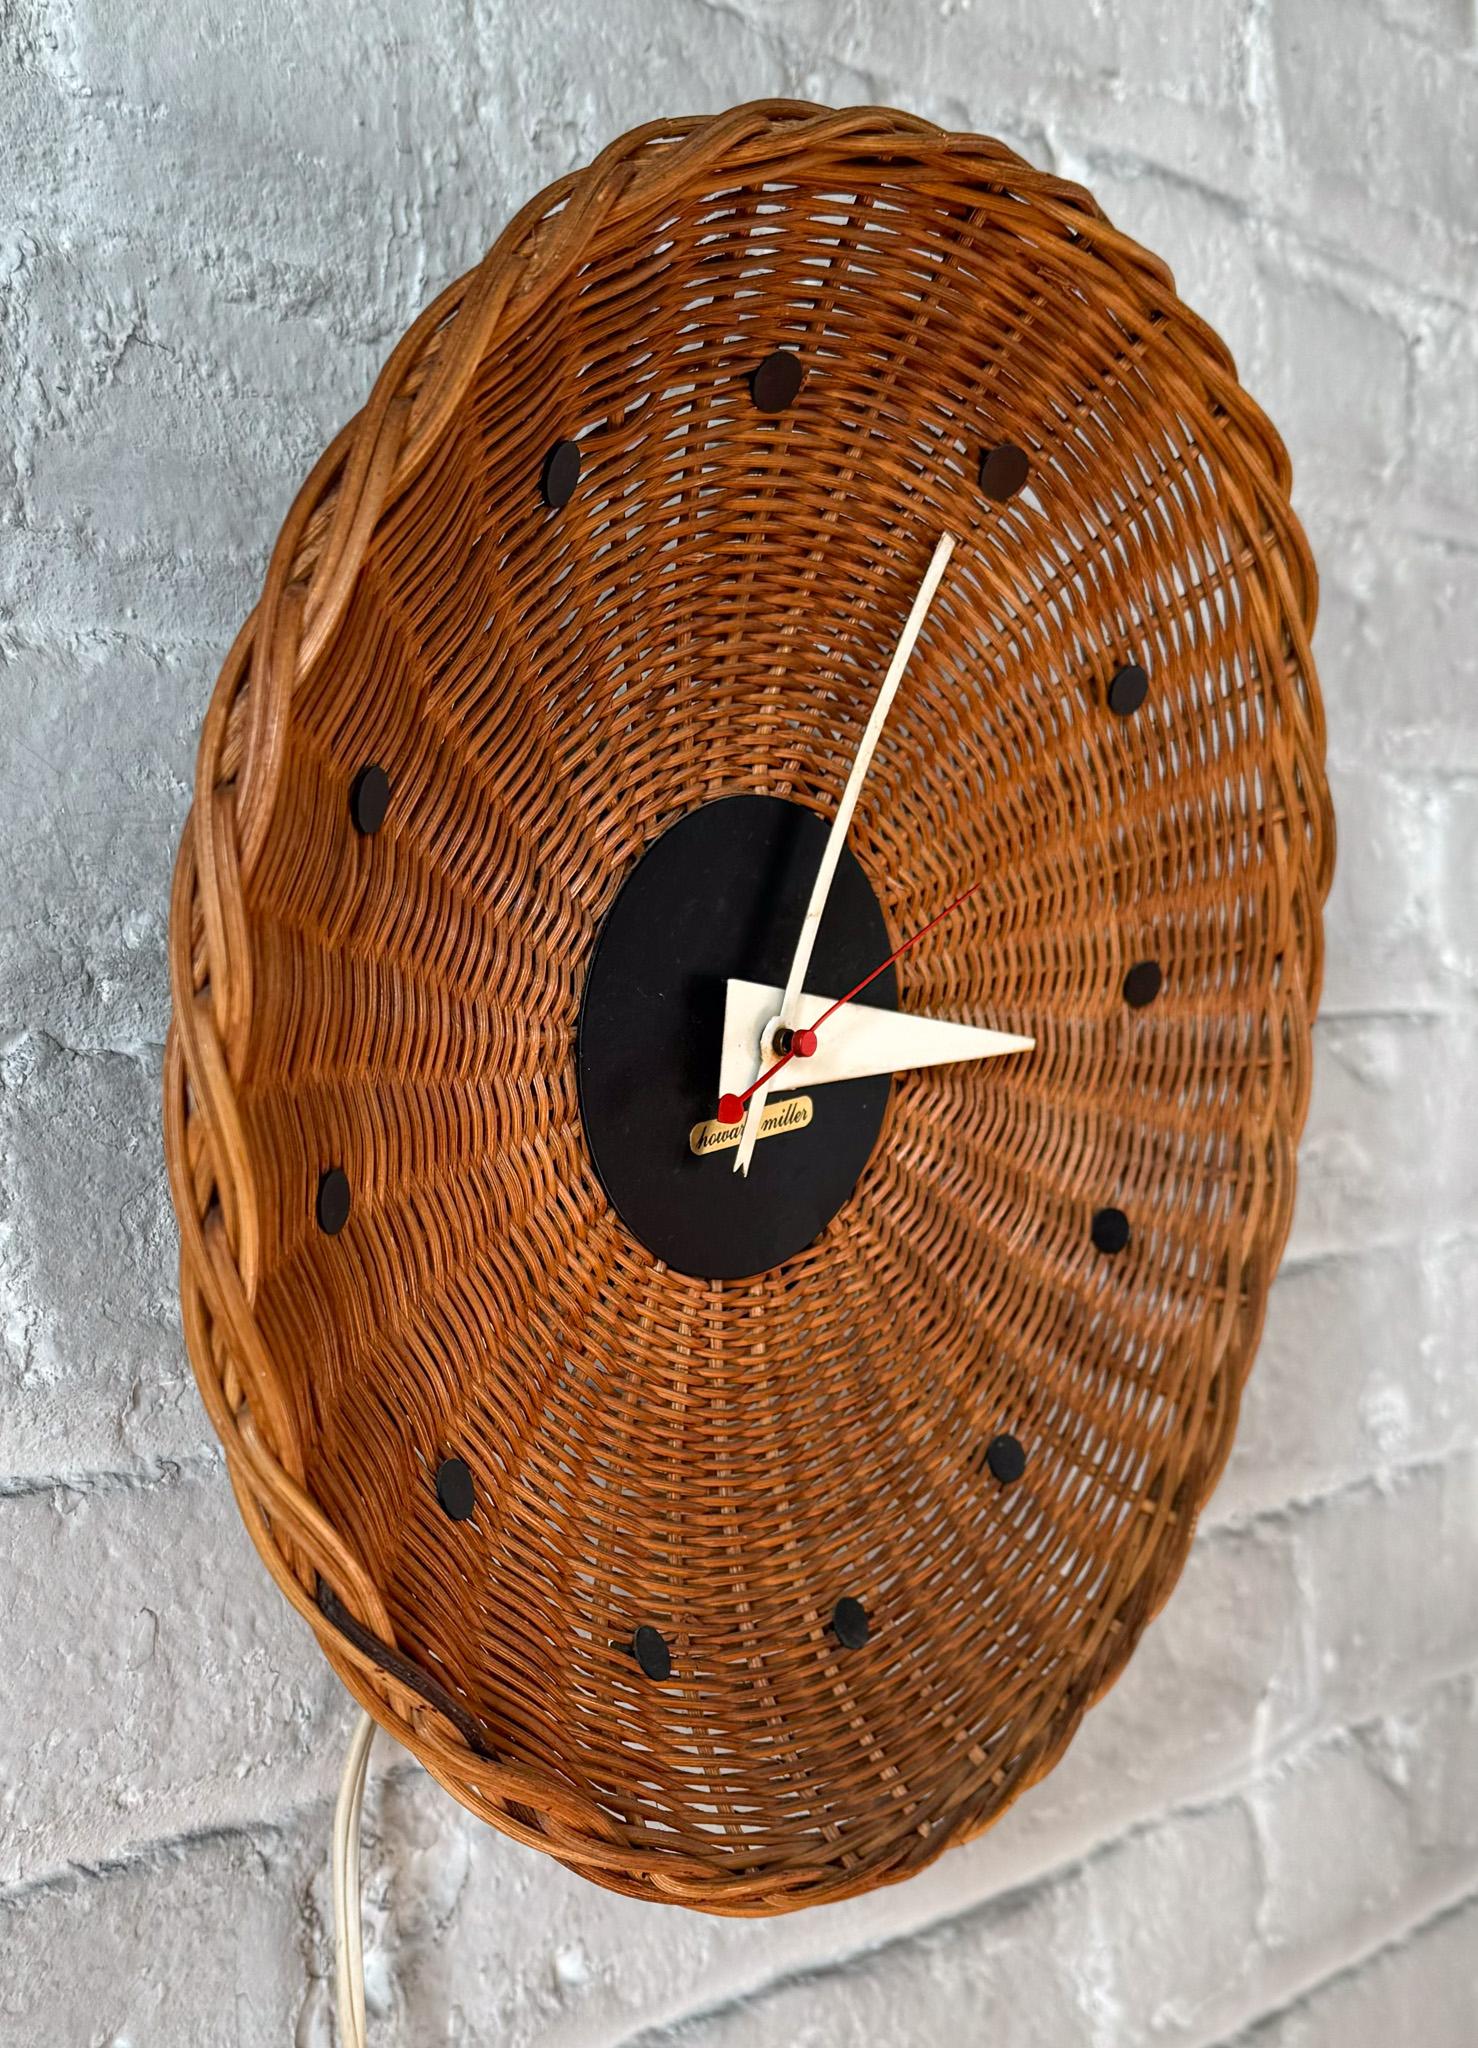 American George Nelson Basket Clock, model 2215 For Sale